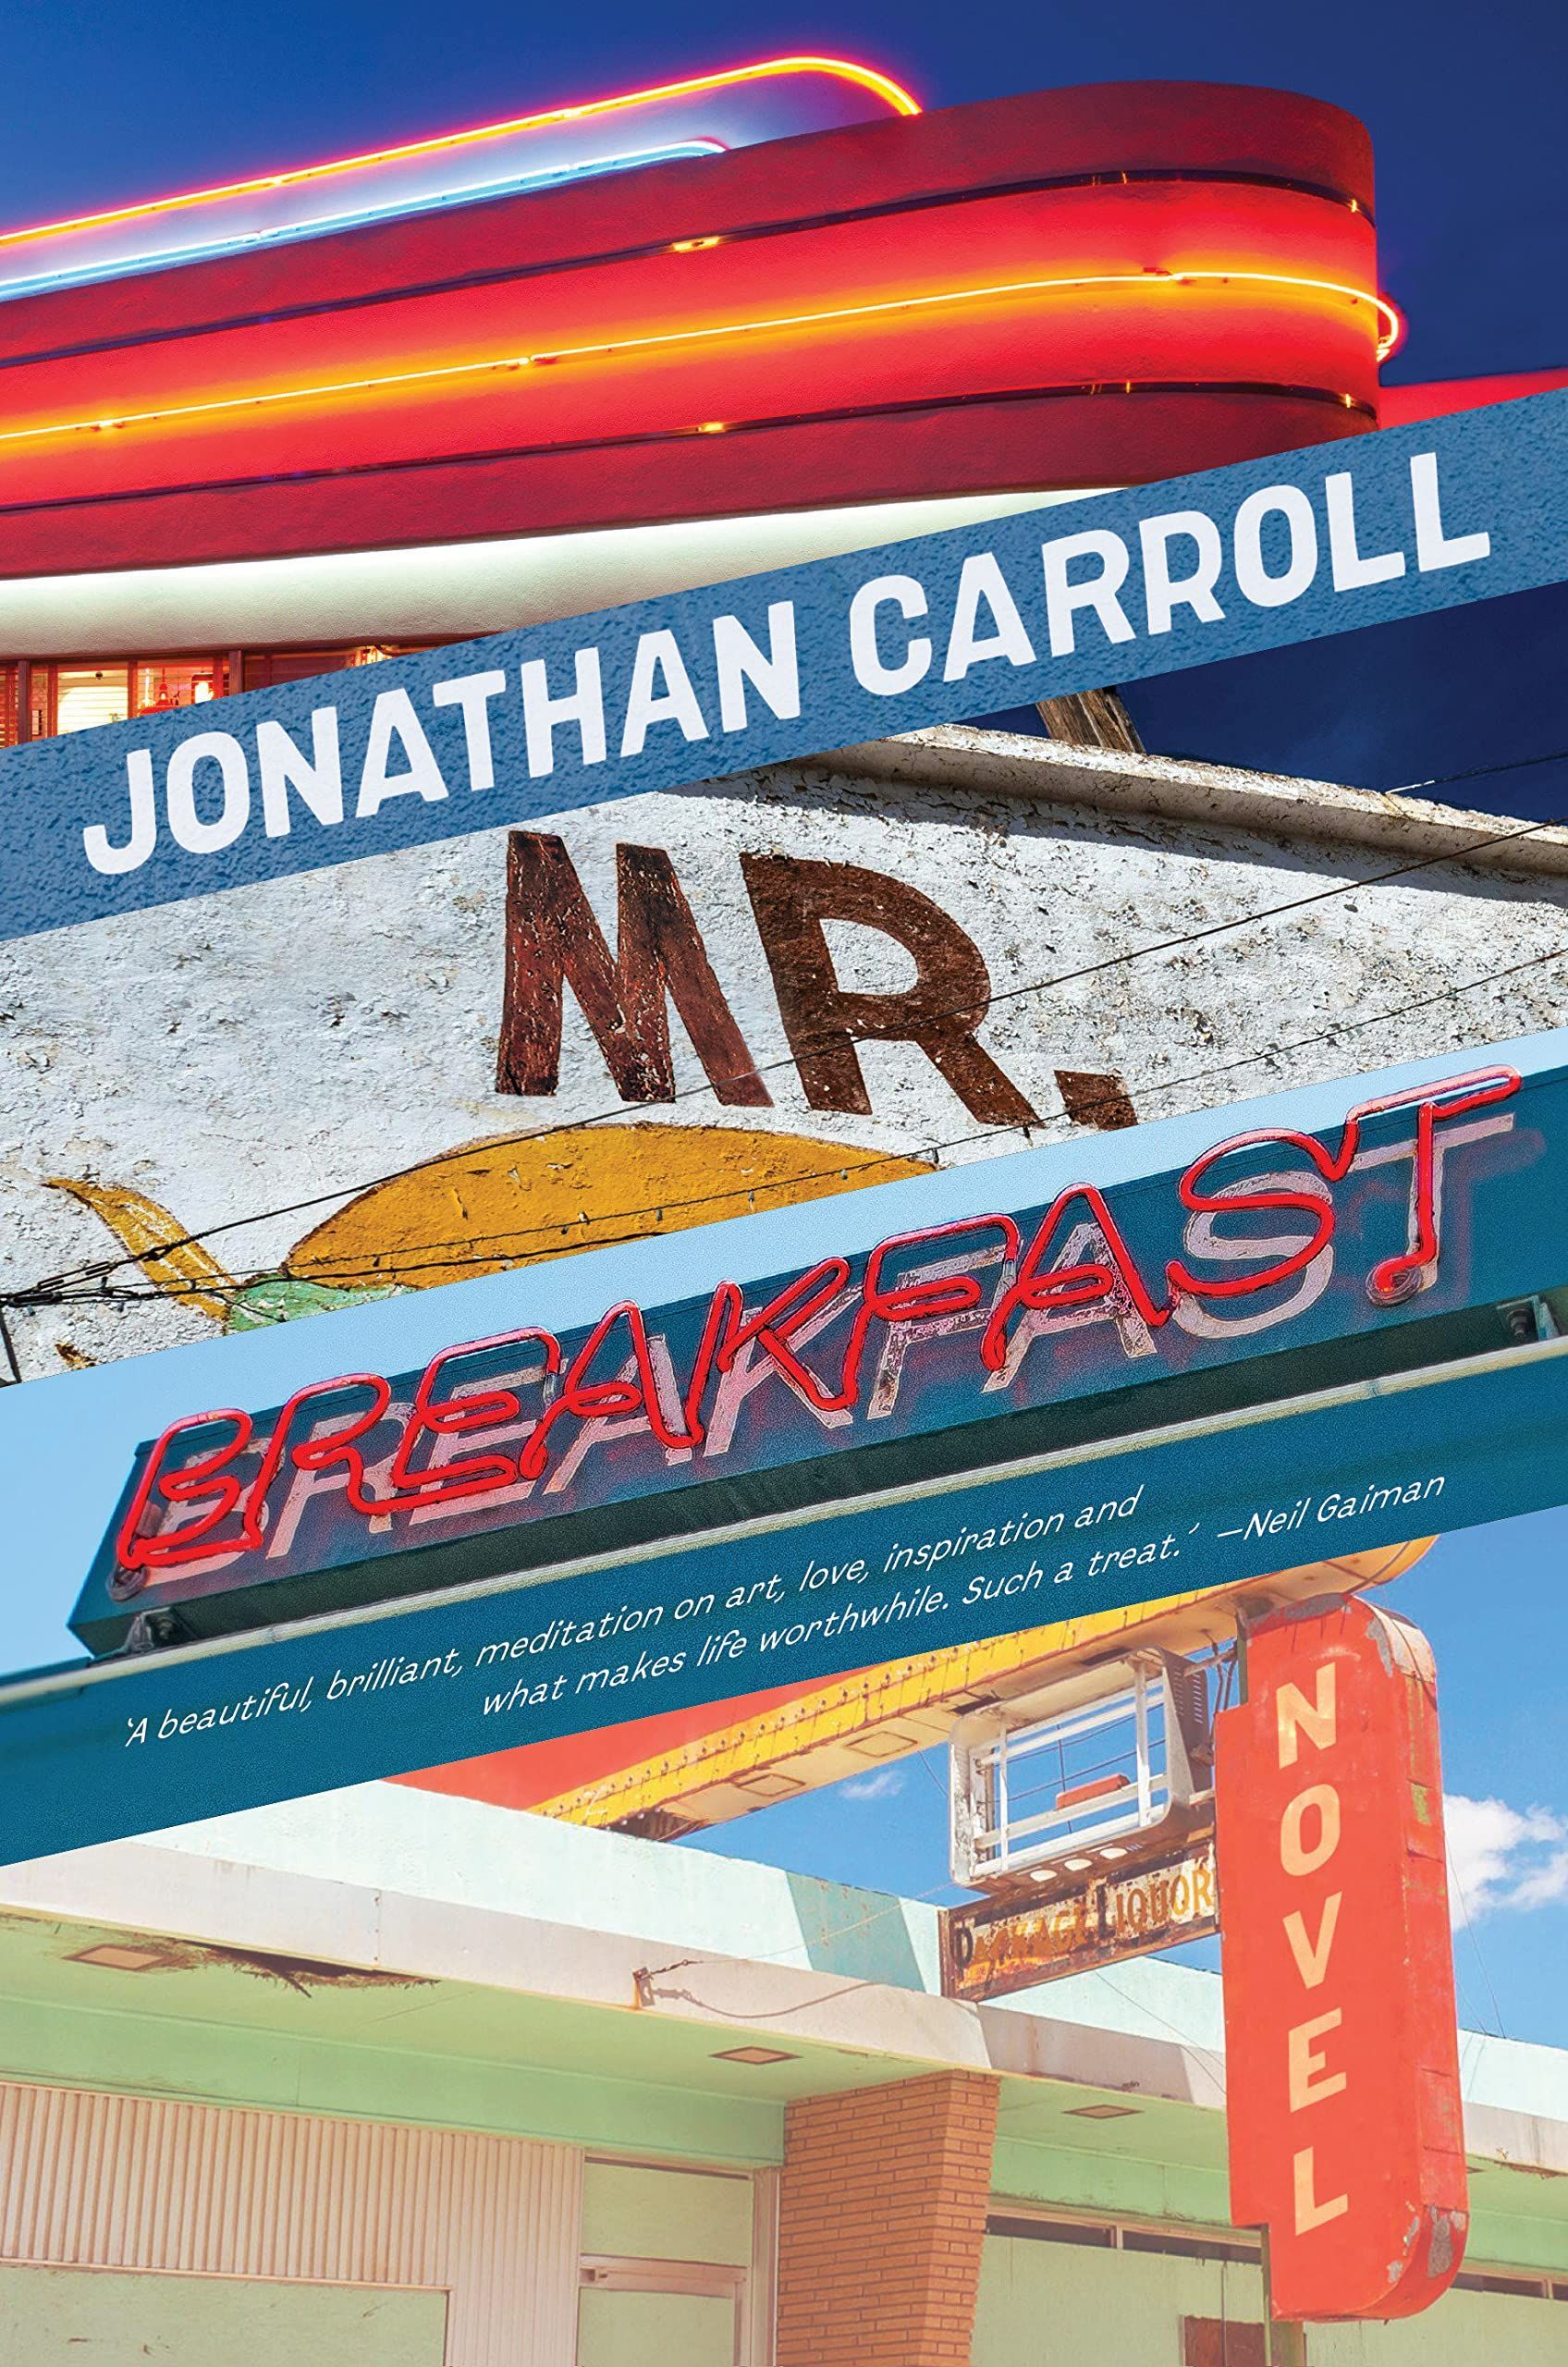 Are You Living Your Best Multiverse Life?: An Interview with Jonathan Carroll